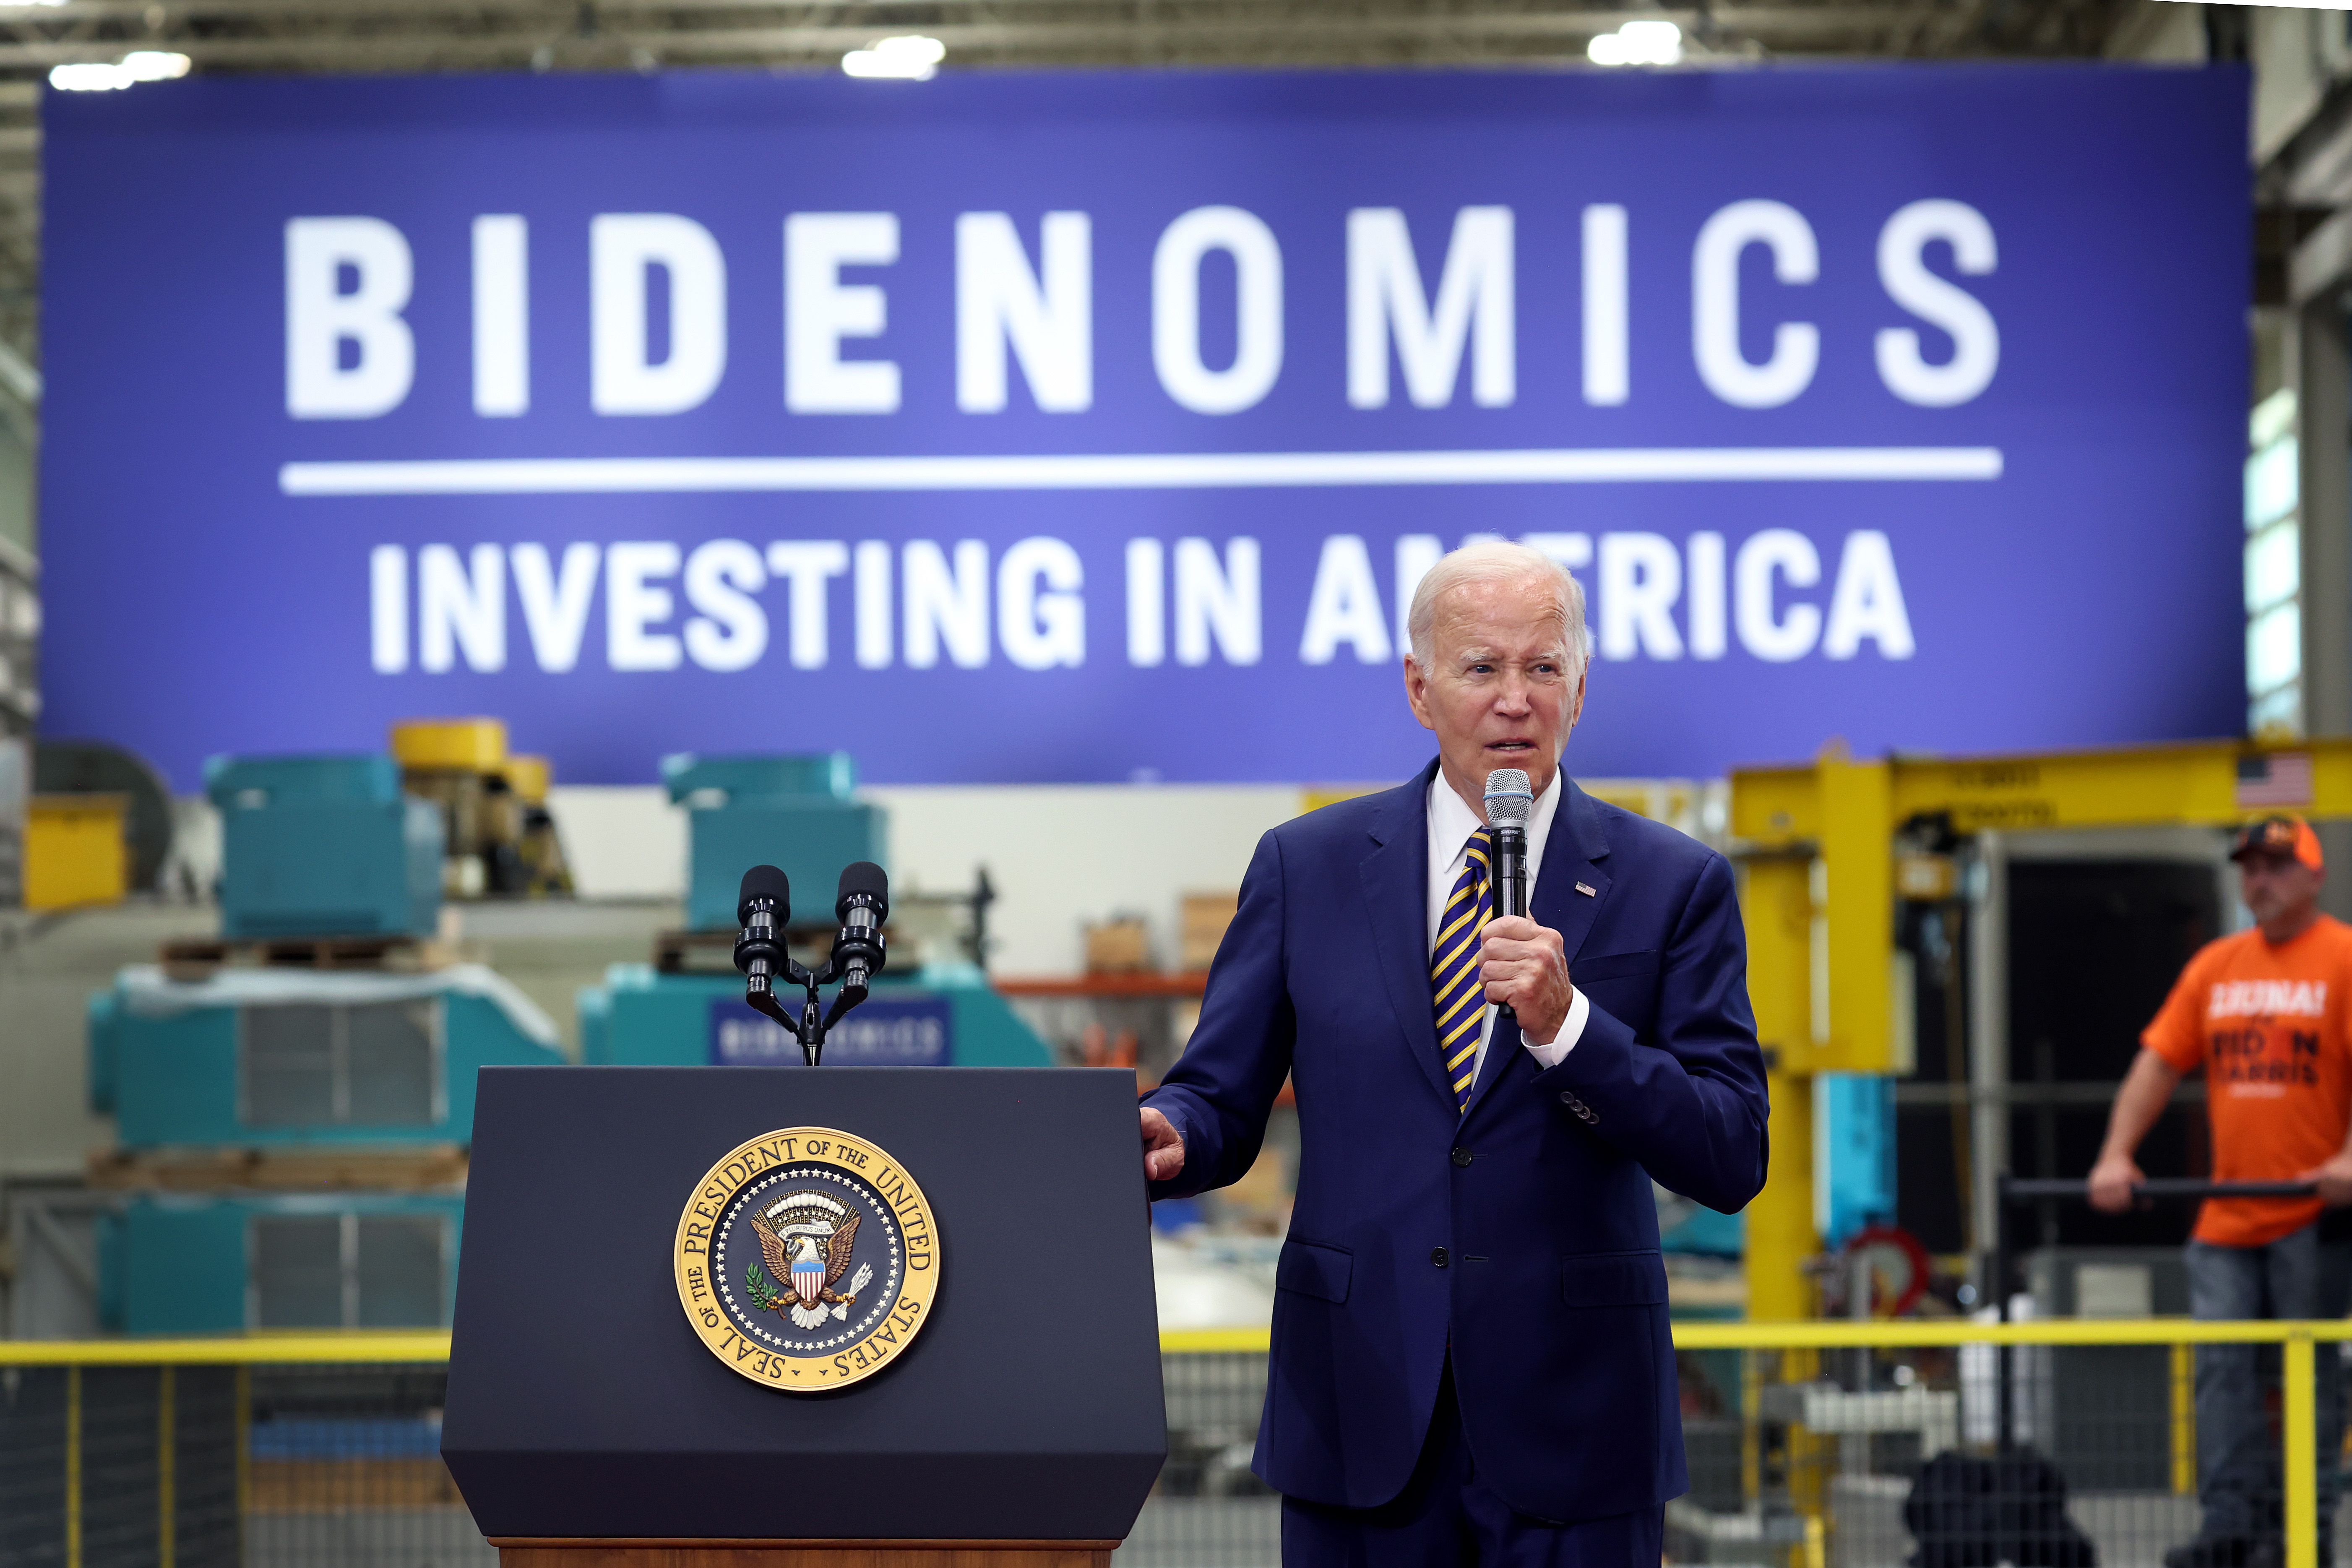 President Biden at an electrical equipment plant speaking beside a lectern in front of a sign that reads “Bidenomics: Investing in America.”